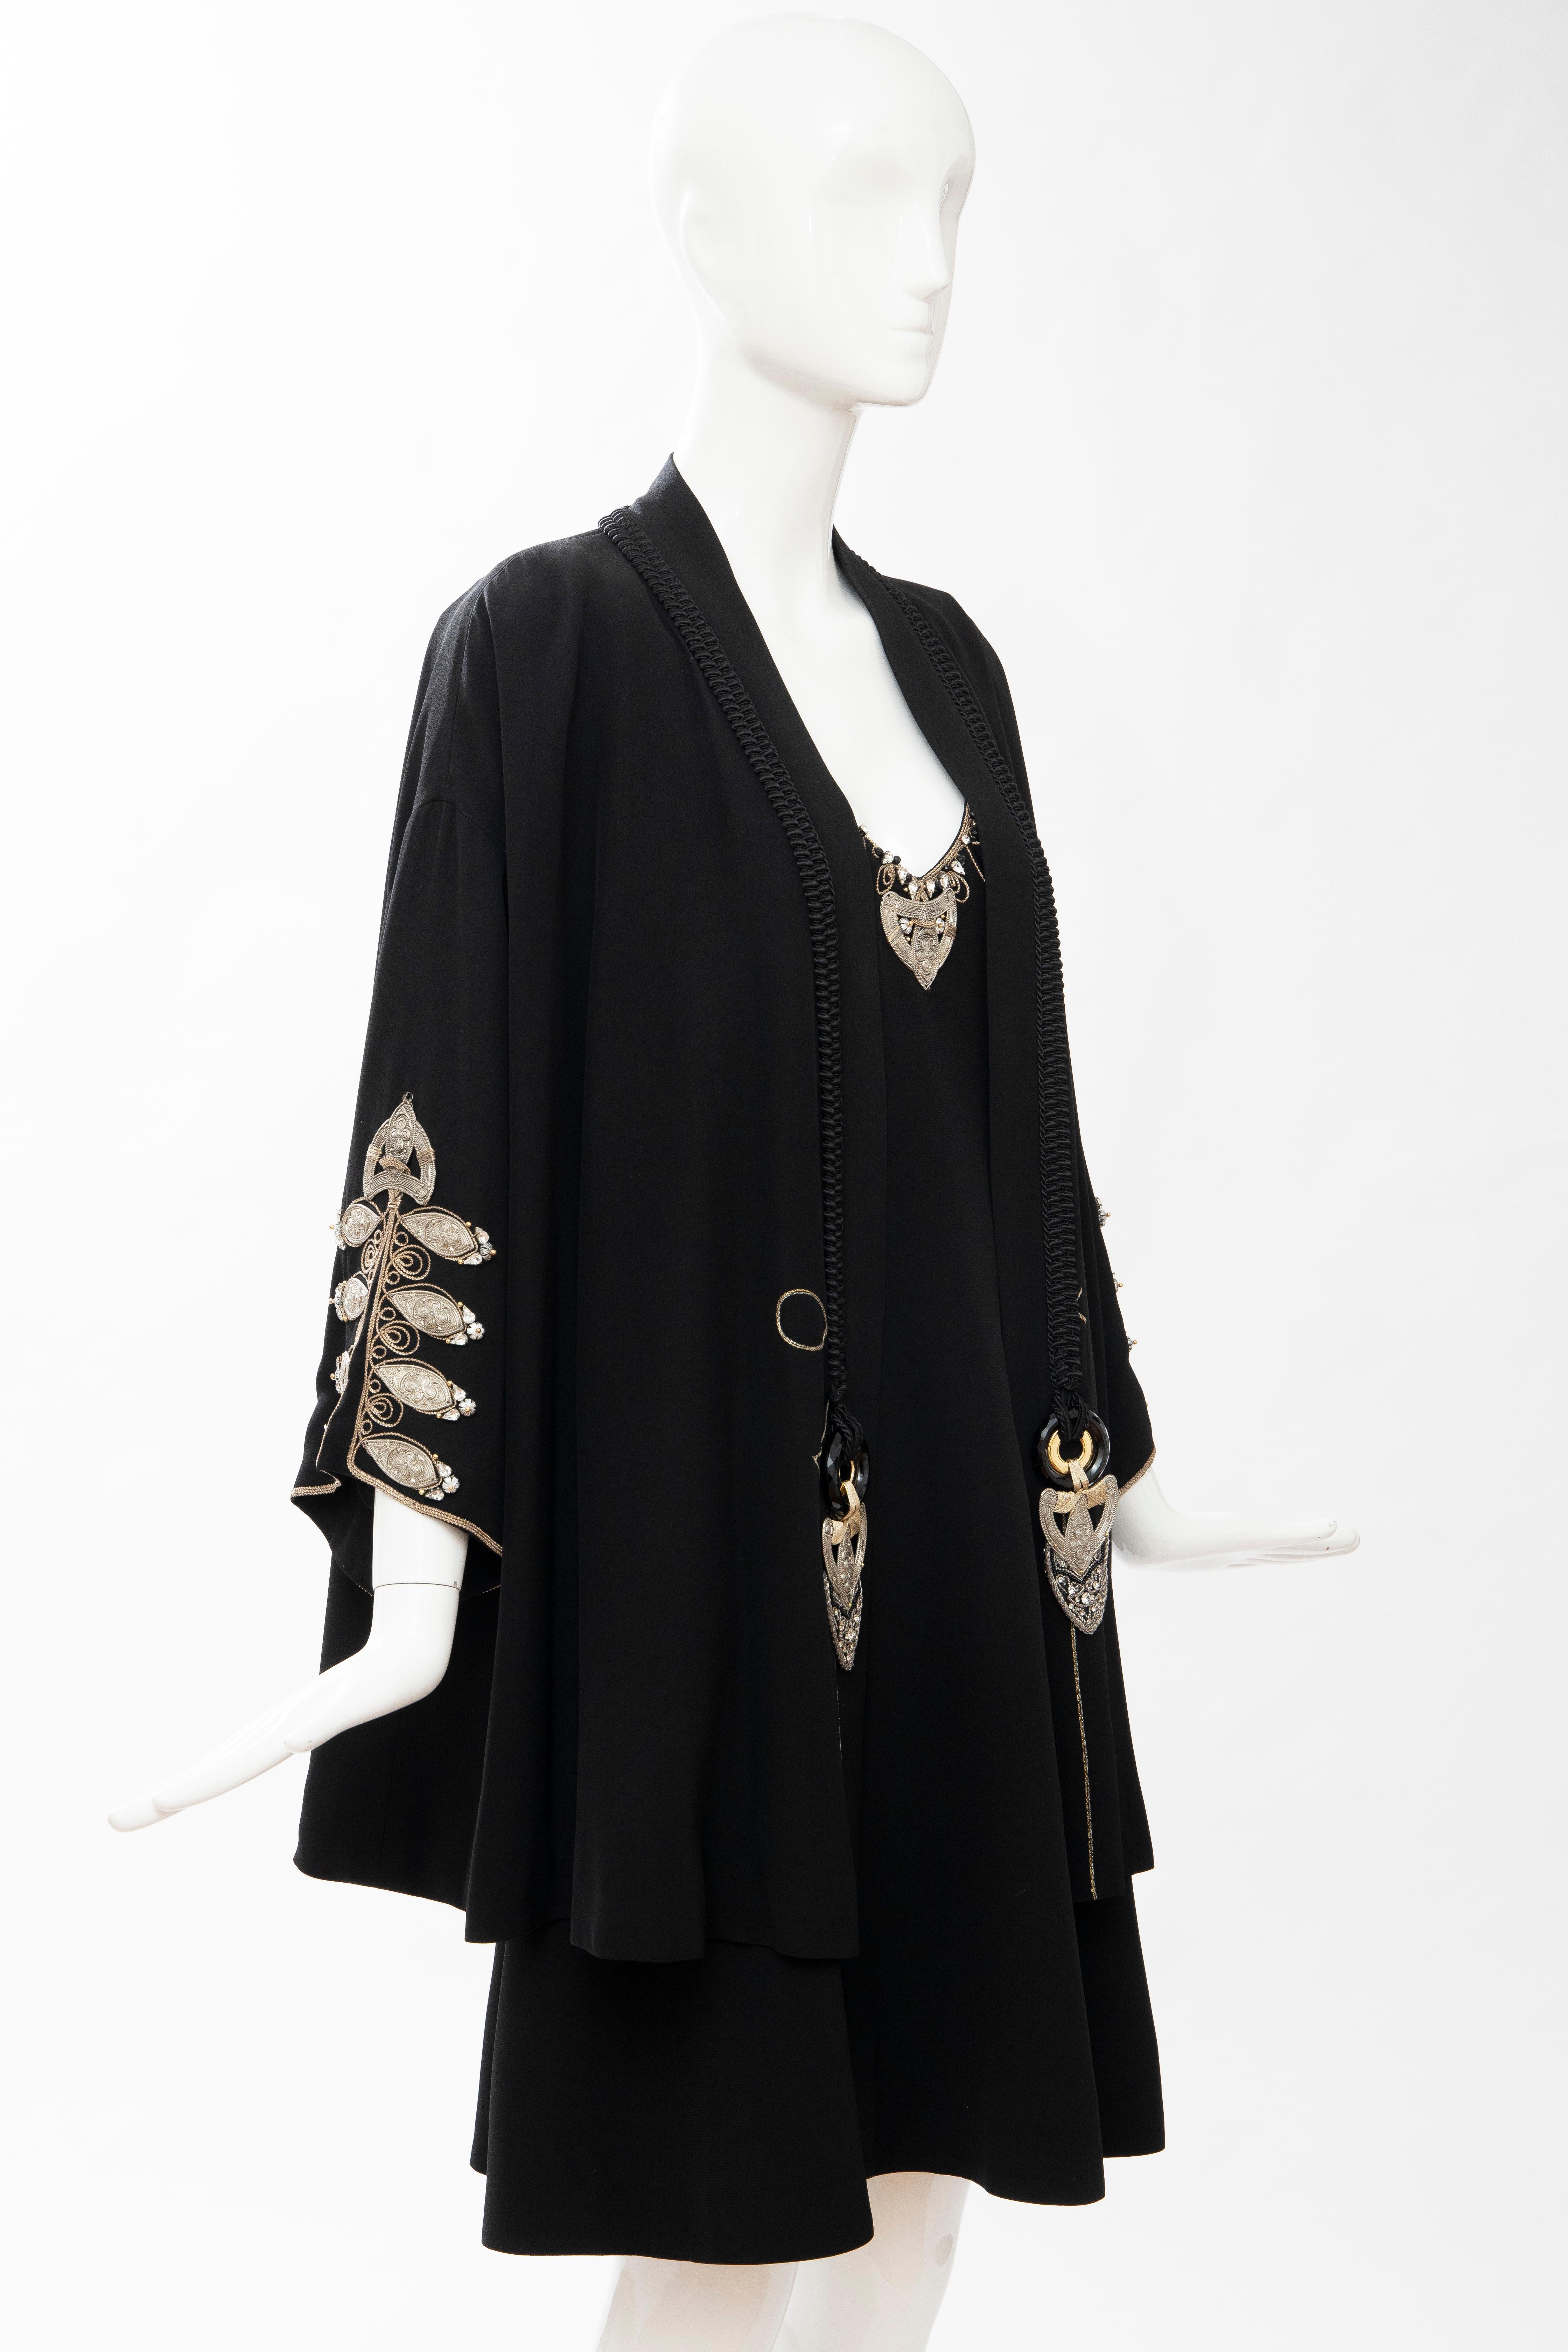 Christian Dior Gianfranco Ferré Numbered Black Embroidered Dress Ensemble, 1991 In Good Condition In Cincinnati, OH